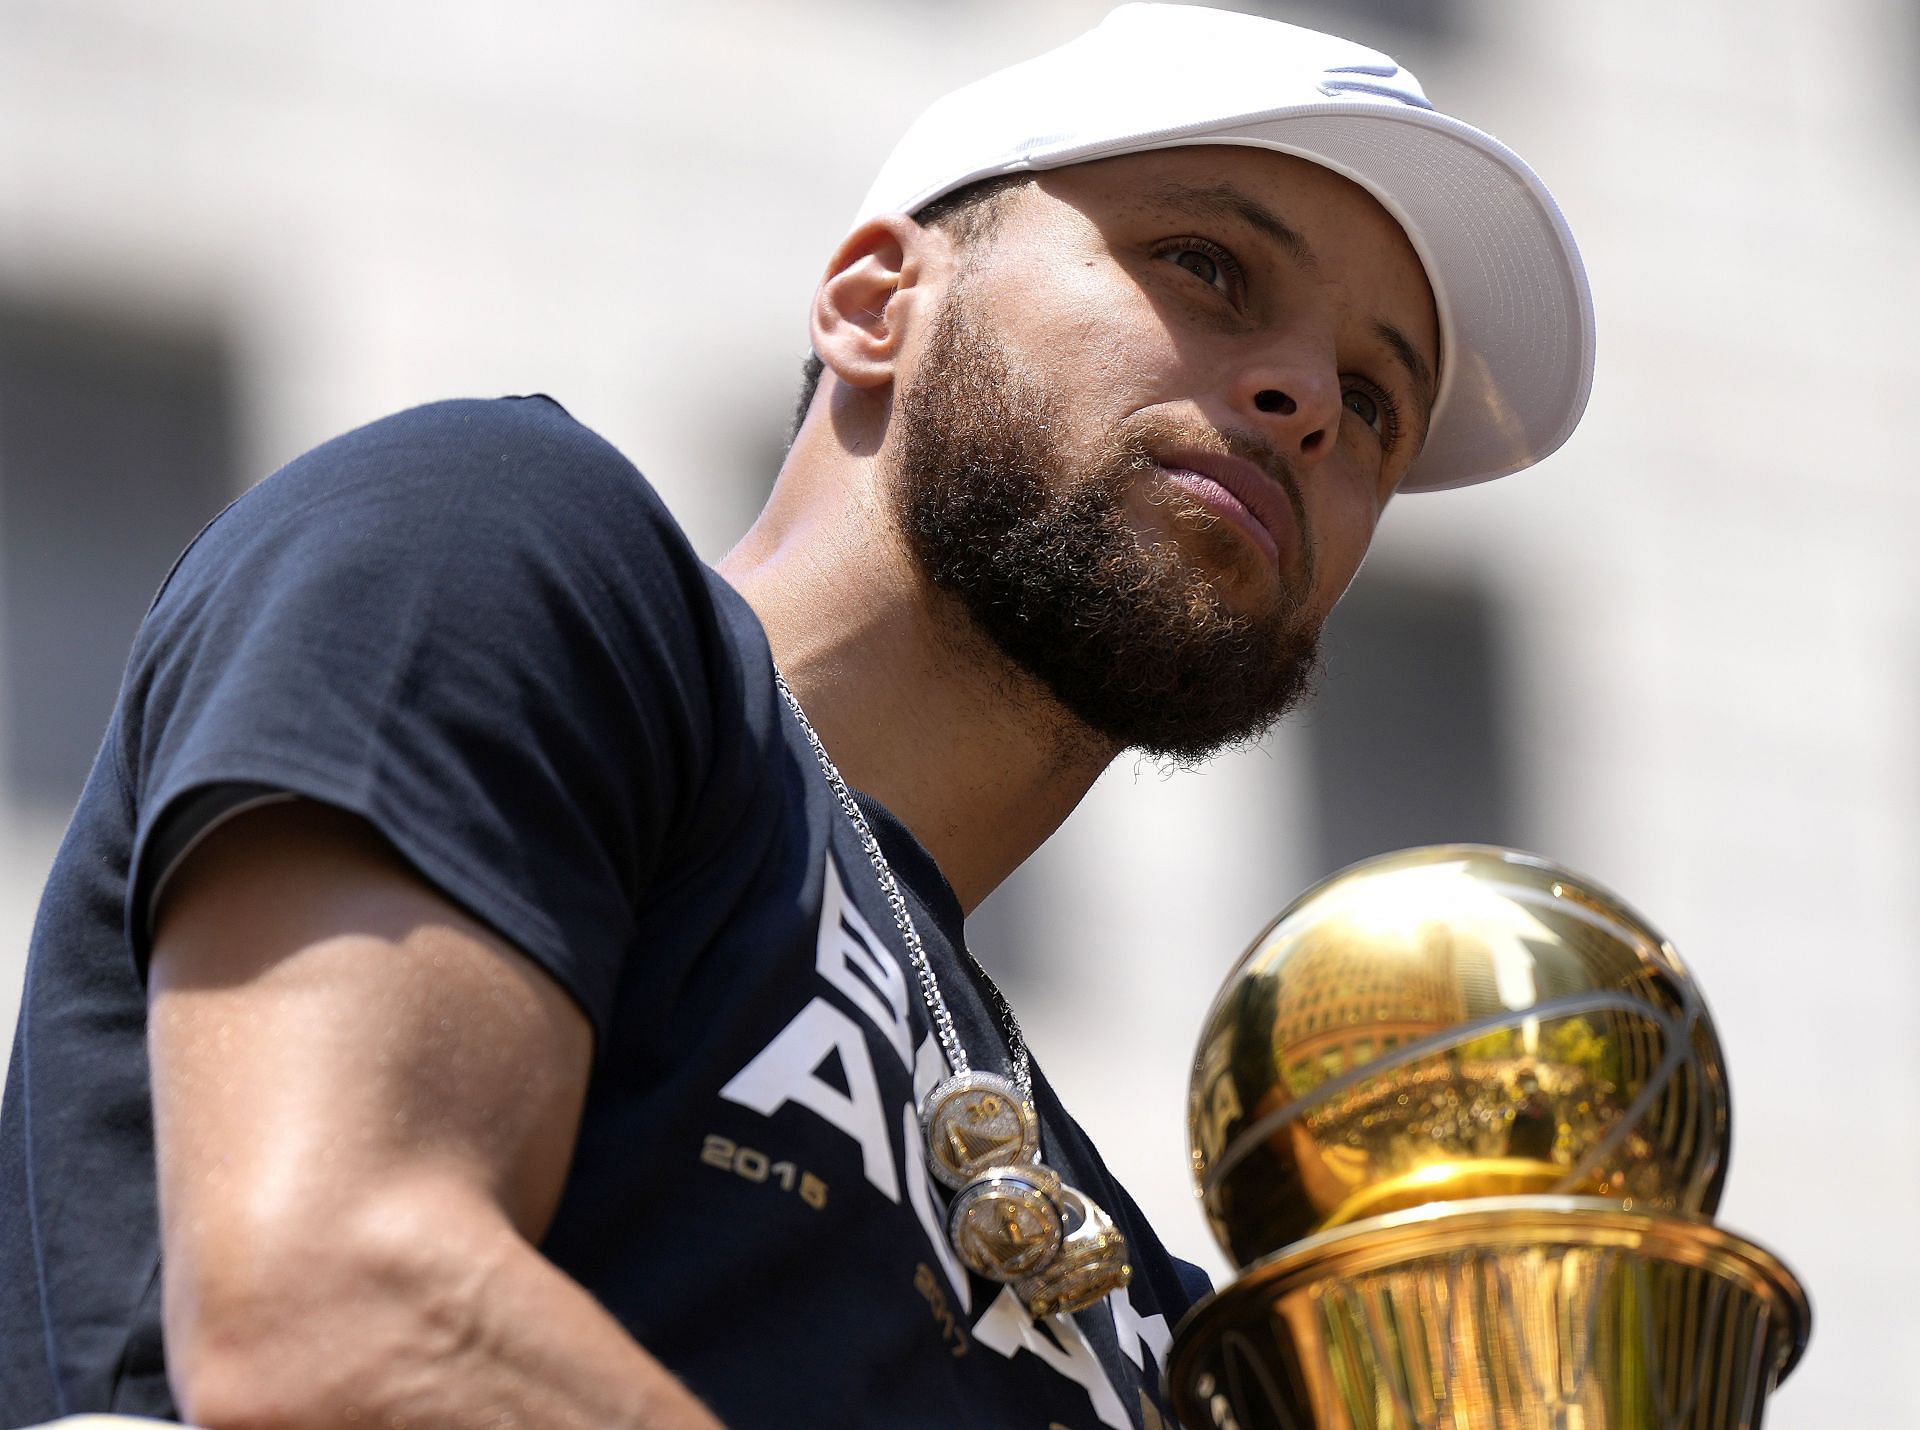 Stephen &lt;a href=&#039;https://www.sportskeeda.com/basketball/stephen-curry&#039; target=&#039;_blank&#039; rel=&#039;noopener noreferrer&#039;&gt;Curry&lt;/a&gt; of the Golden State Warriors celebrates with NBA Finals MVP Award during a parade on Monday in San Francisco, California. The Warriors beat the Boston Celtics 4-2 to win the NBA Finals.